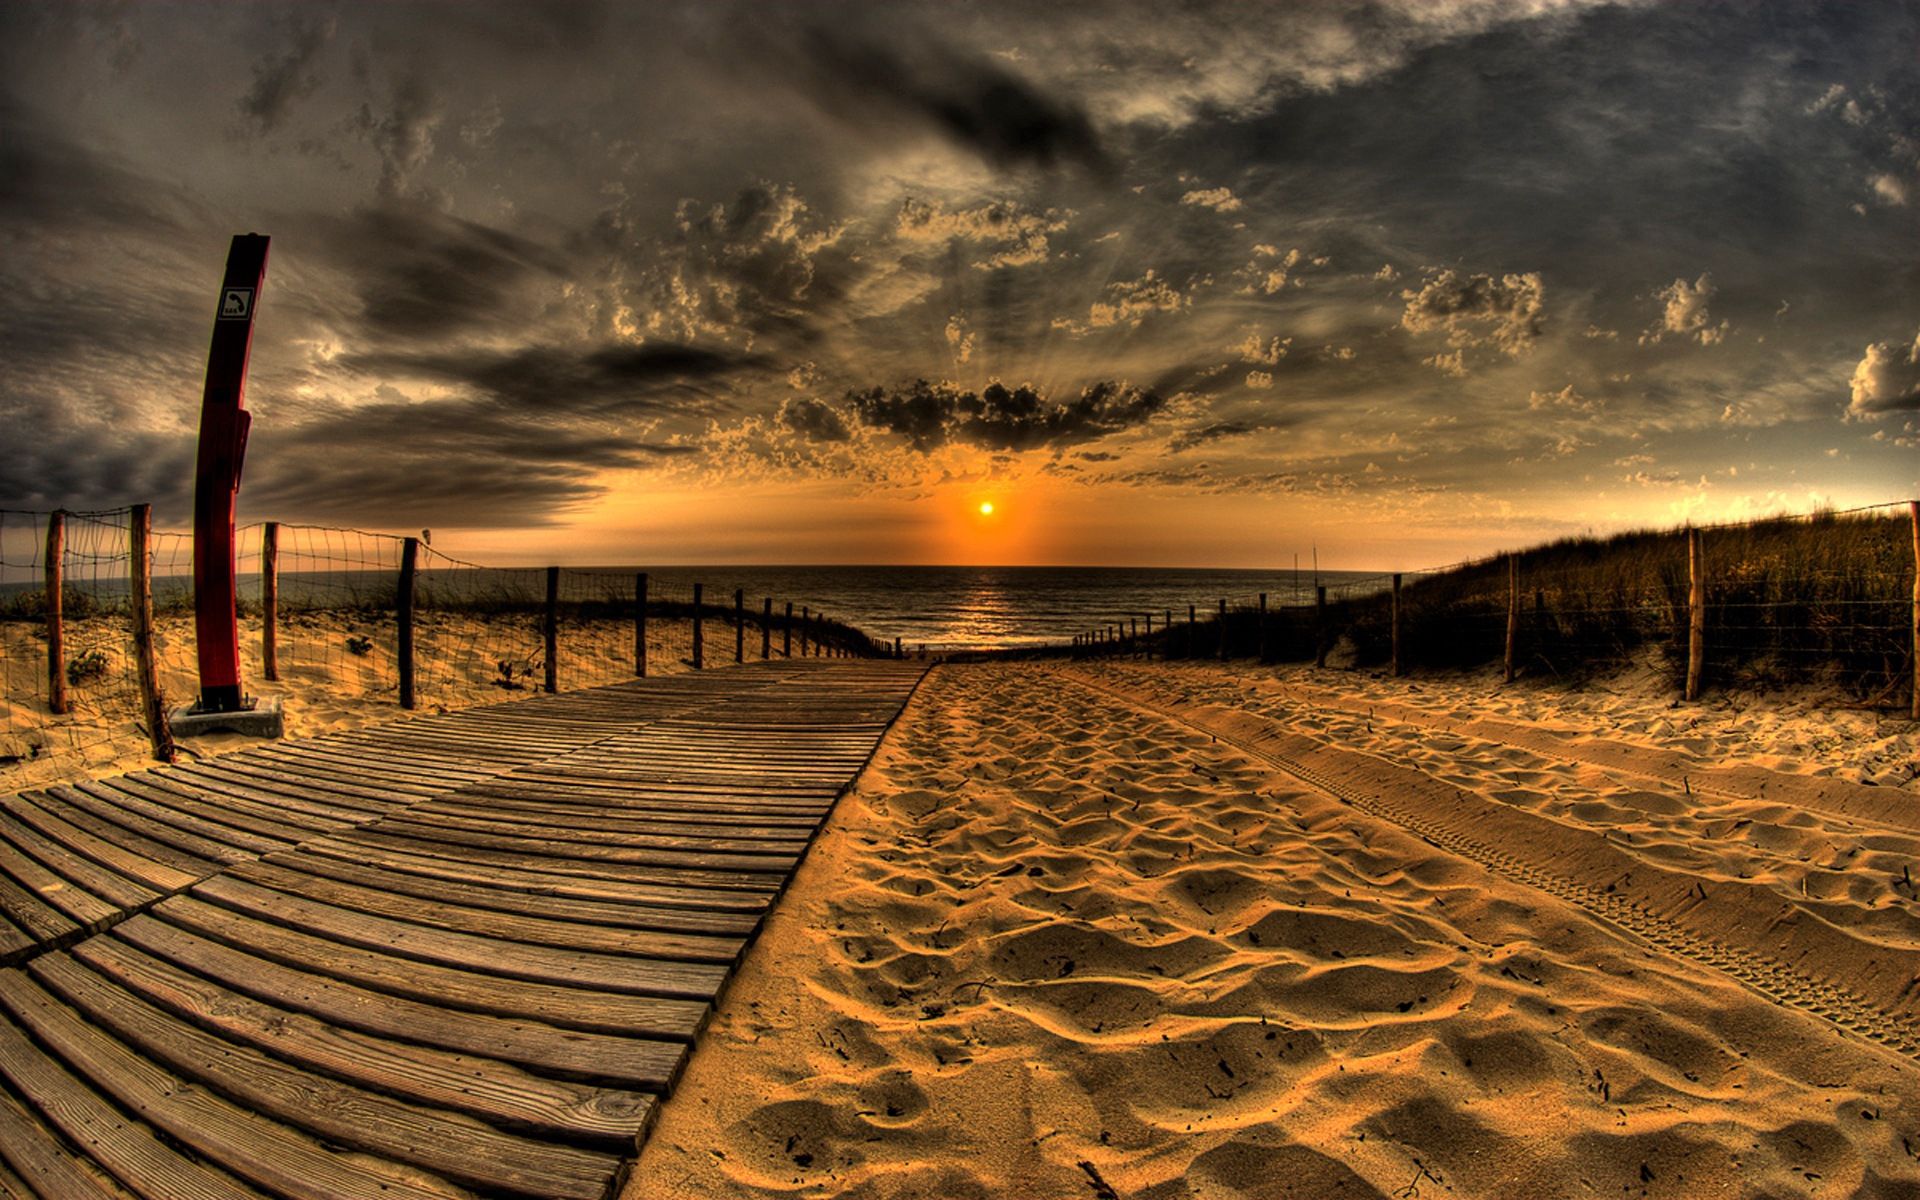 sunset, beach, road, evening, sun, sky, nature, clouds, sand, fence, traces